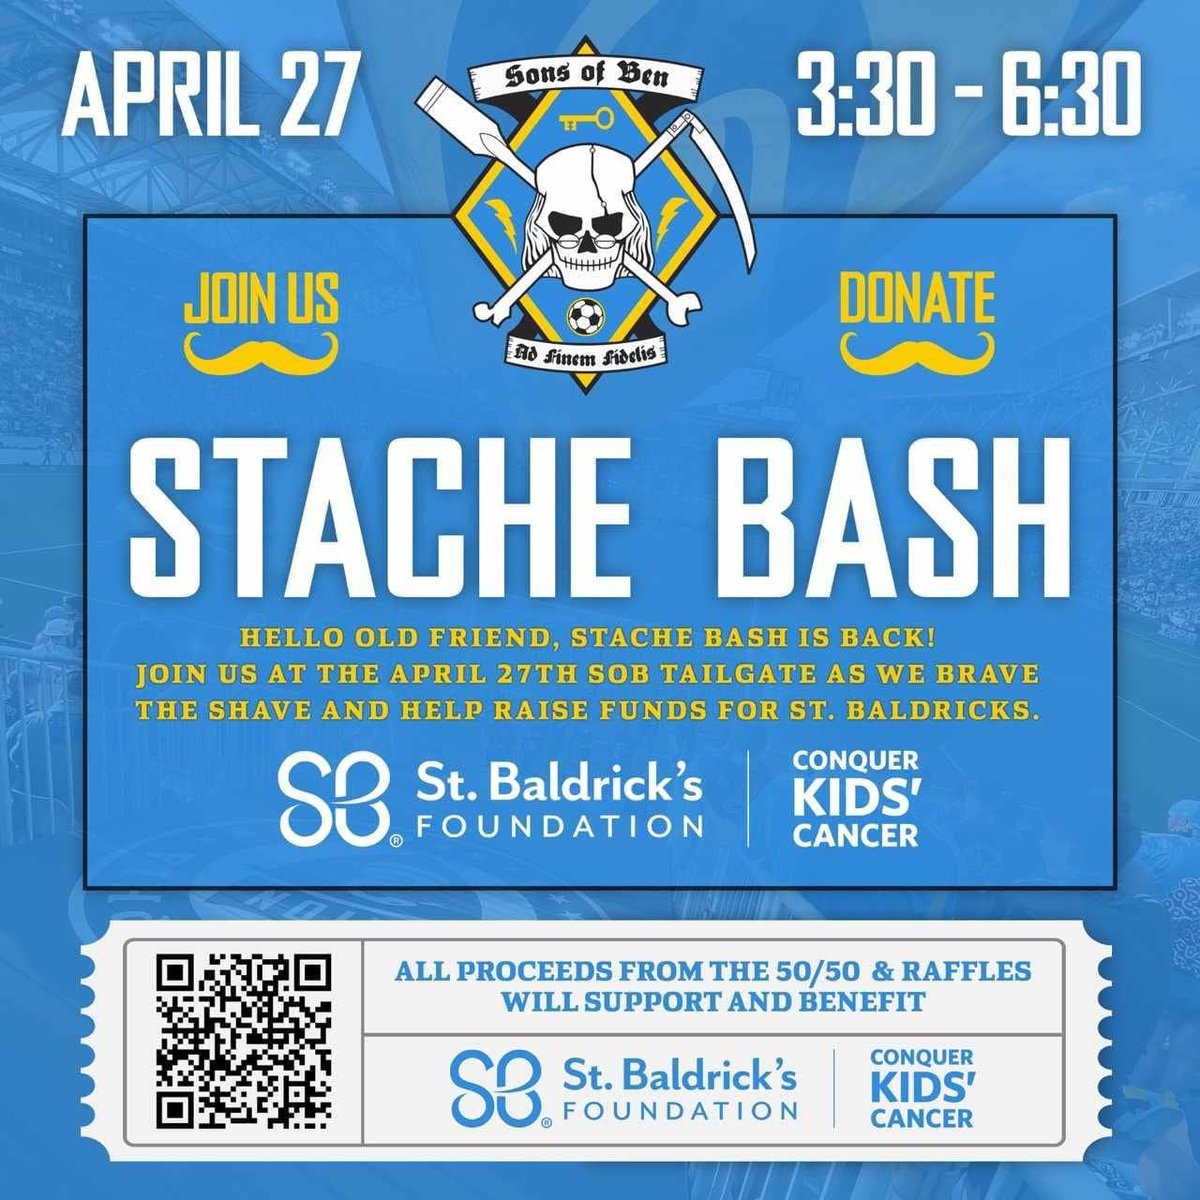 Join us on April 27, 2024, for our Stache Bash at the SoB Tailgate! Featuring: King Of Stache Bash, St Baldricks Head Shaving, and 50/50 to support the @StBaldricks Let's fight childhood cancer together! Join our team or donate here: bit.ly/43GOT4p